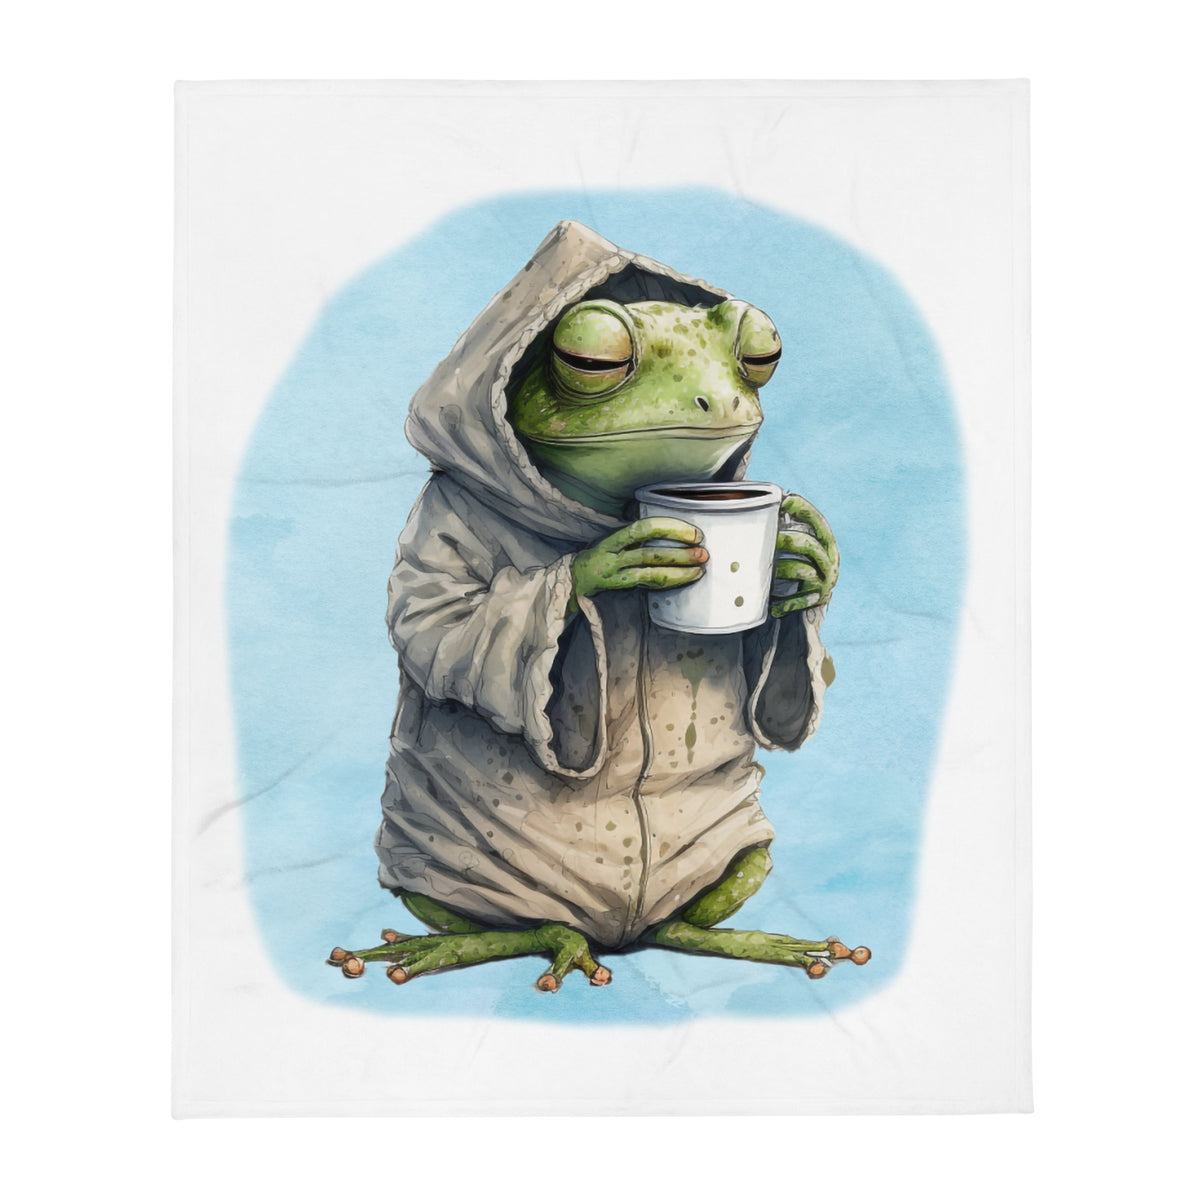 Sleepy Frog 100% Polyester Soft Silk Touch Fabric Throw Blanket - Cozy, Durable and Adorable